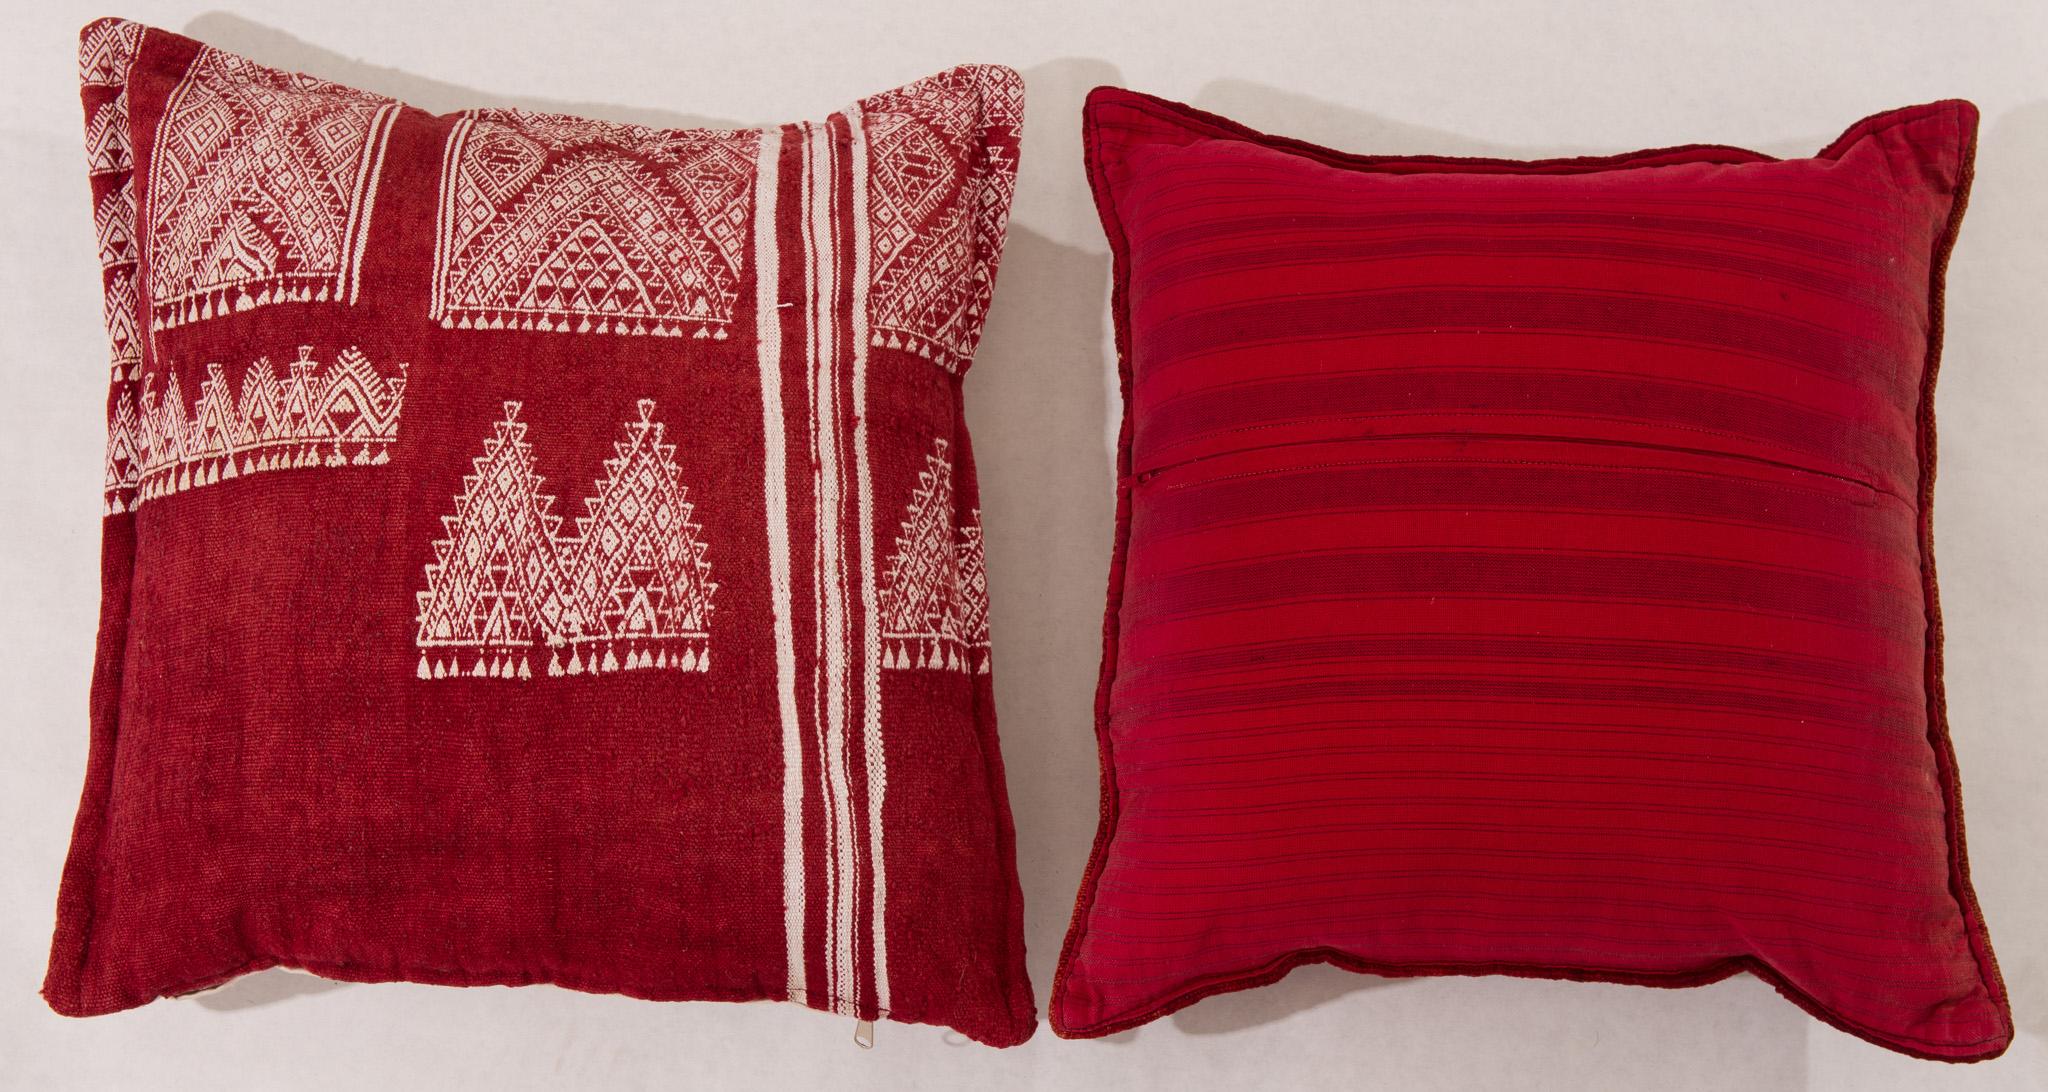 Rare  vintage Tunisian embroidered pillow (only ONE, LEFT), to combine with old Tunisian tissue or carpet LU1379213196871 or LU1379213196841 -
SN/FS.